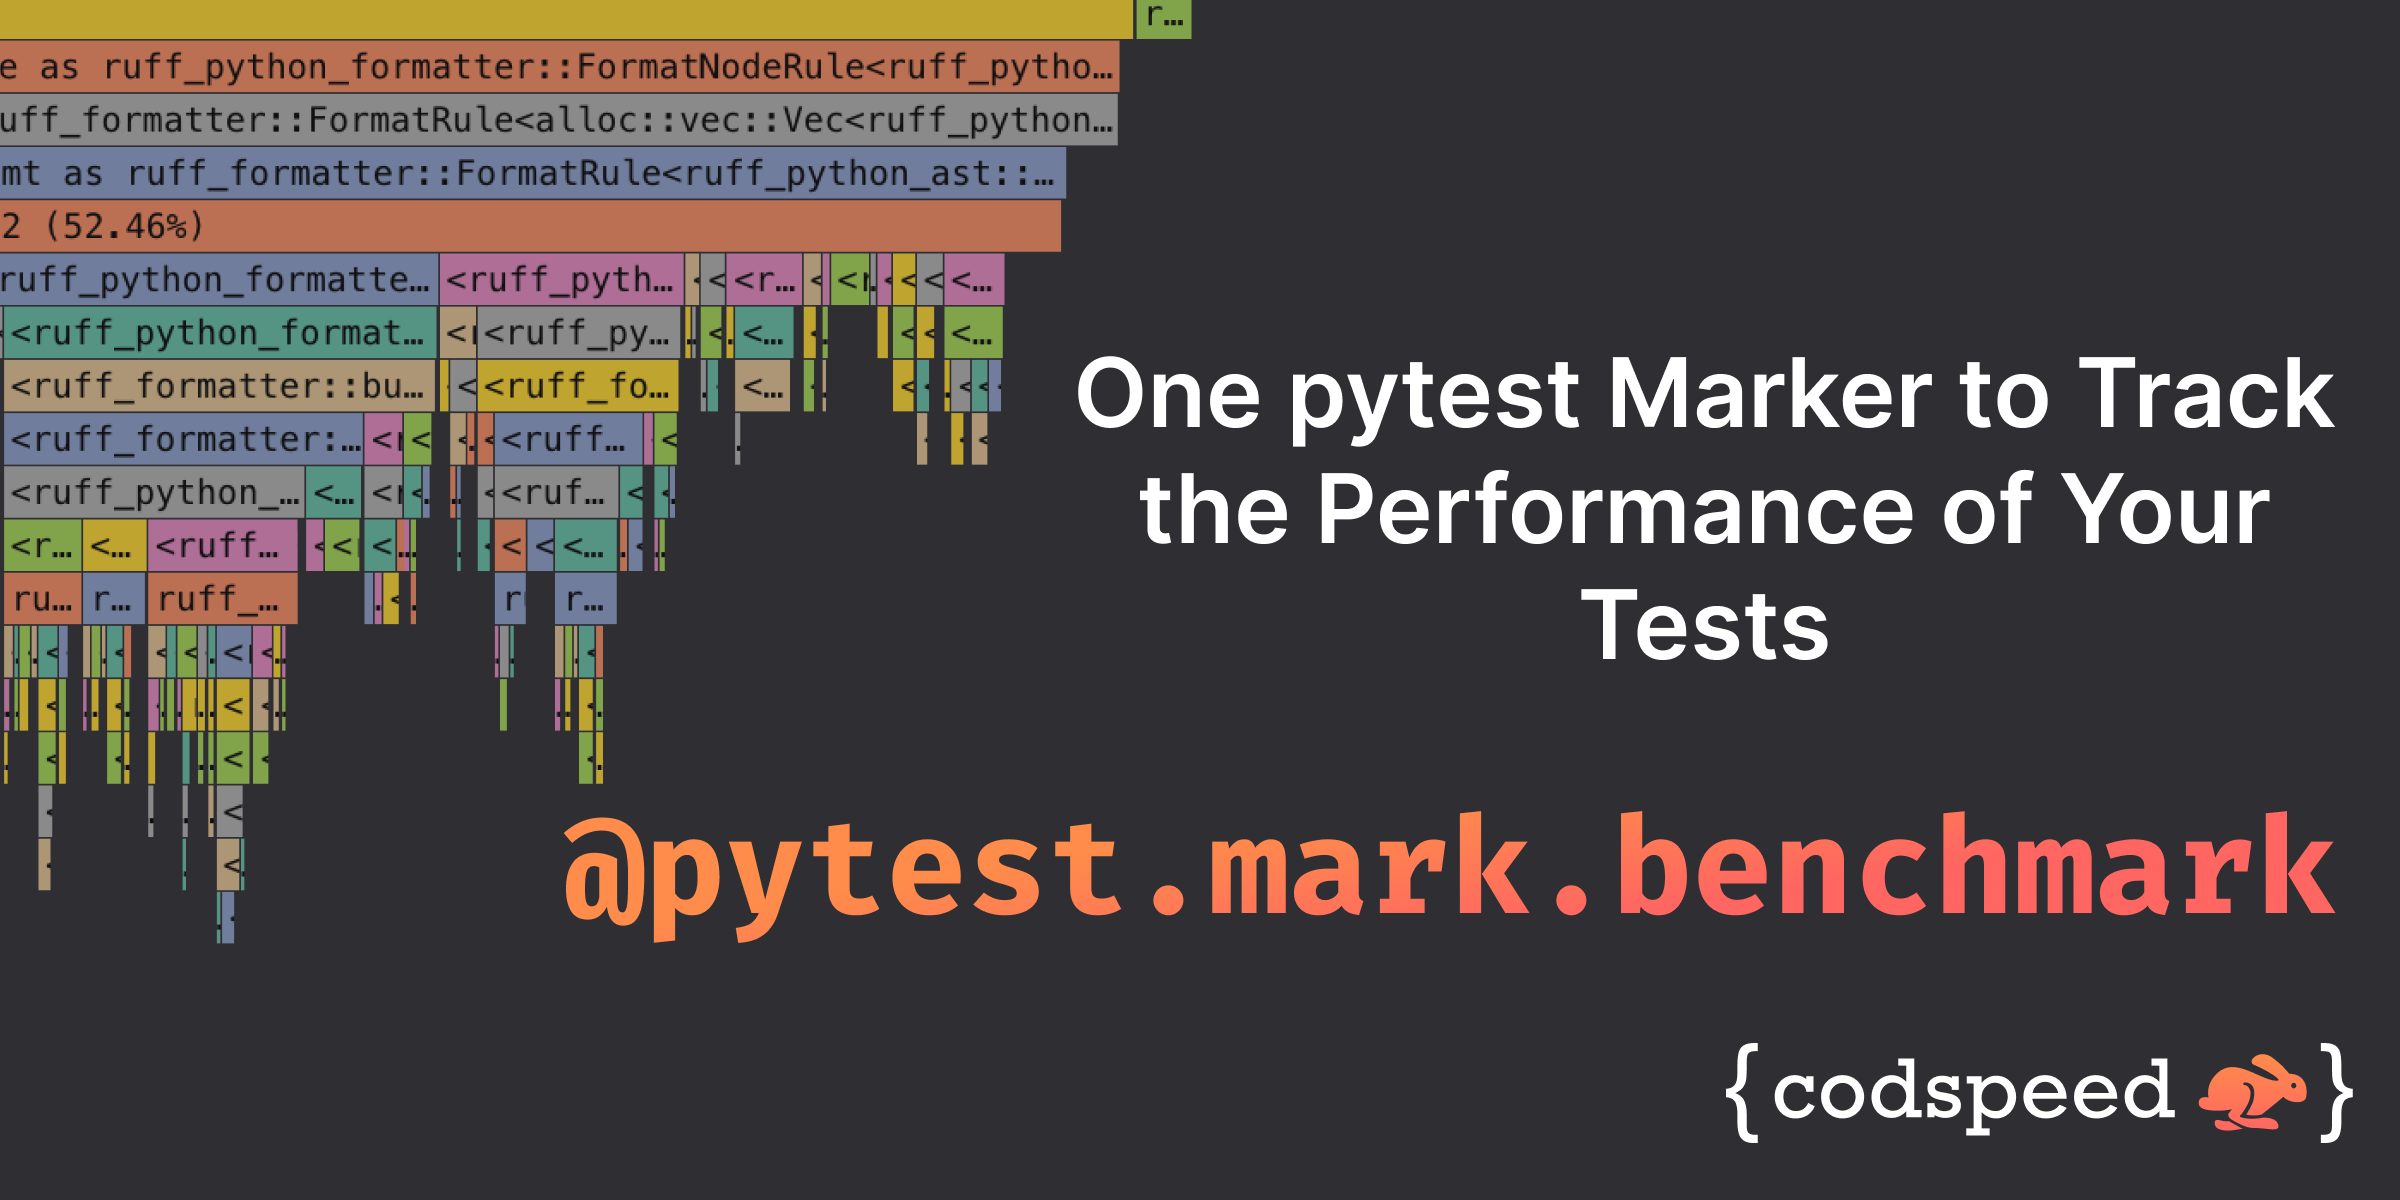 While unit tests have become a standard for ensuring that the code performs as expected, they focus on checking the logic, not the performance. Yet, p